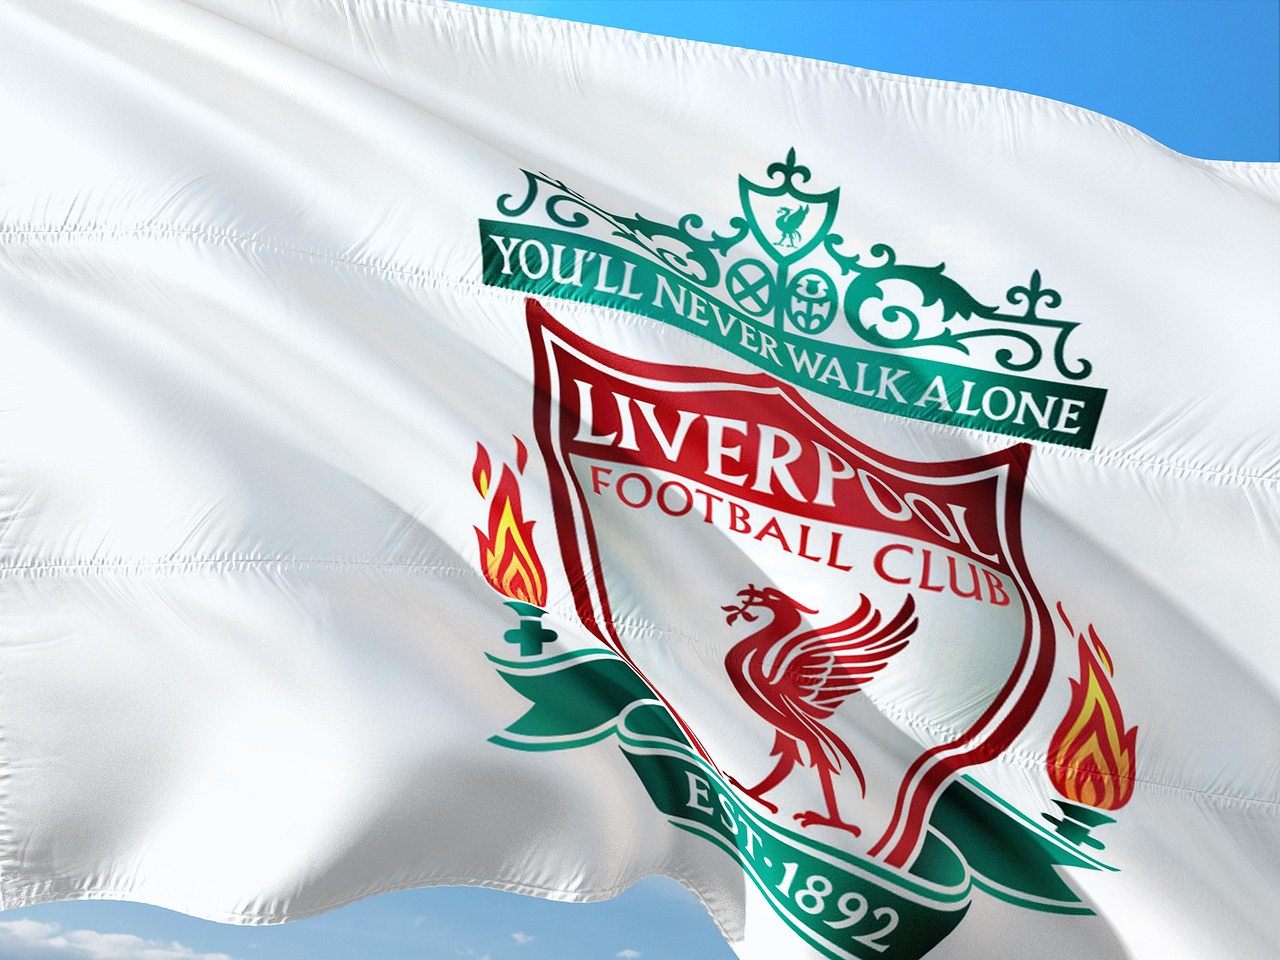 Liverpool FC’s impact on Malaysian football culture